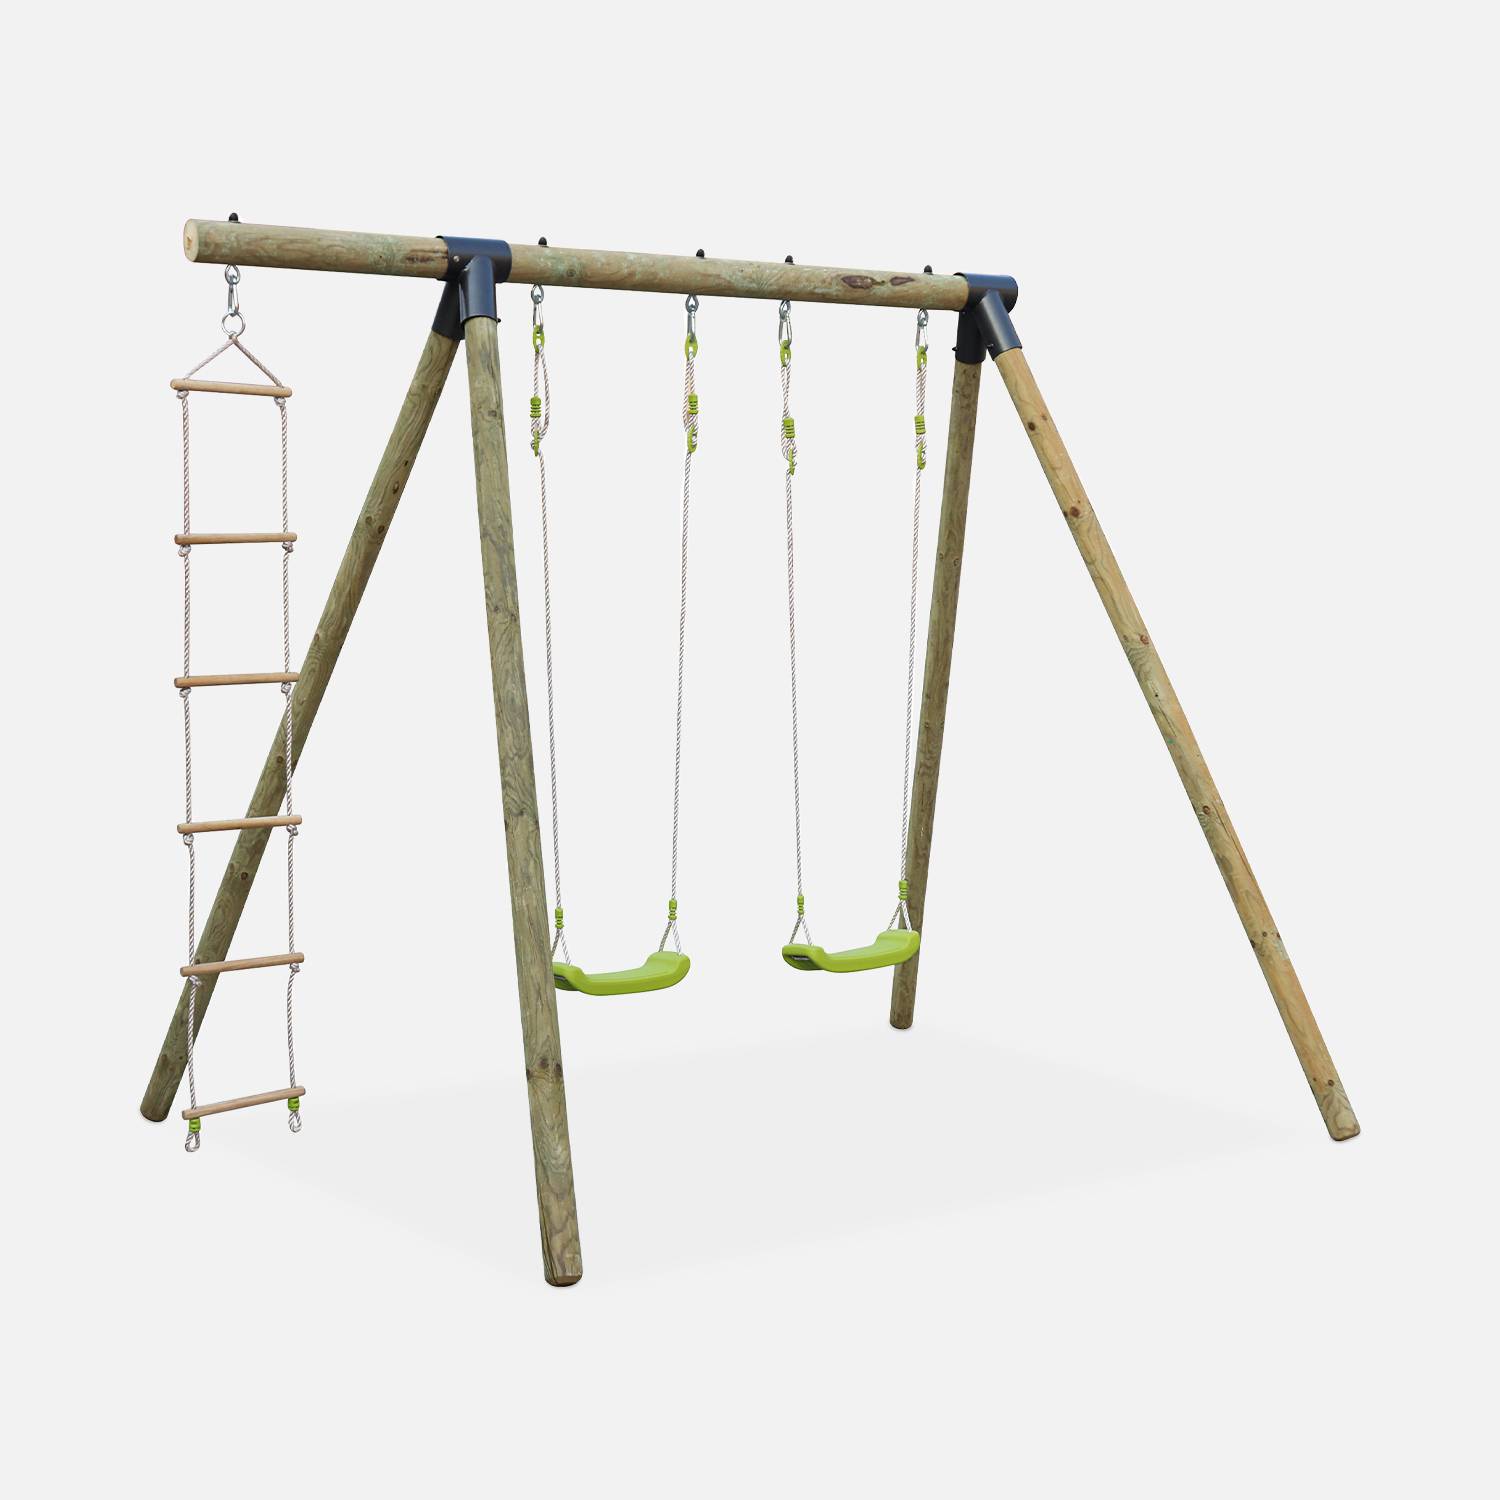 Wooden swing set with two swings and climbing rope ladder - pressure treated FSC pine - Mistral Photo1